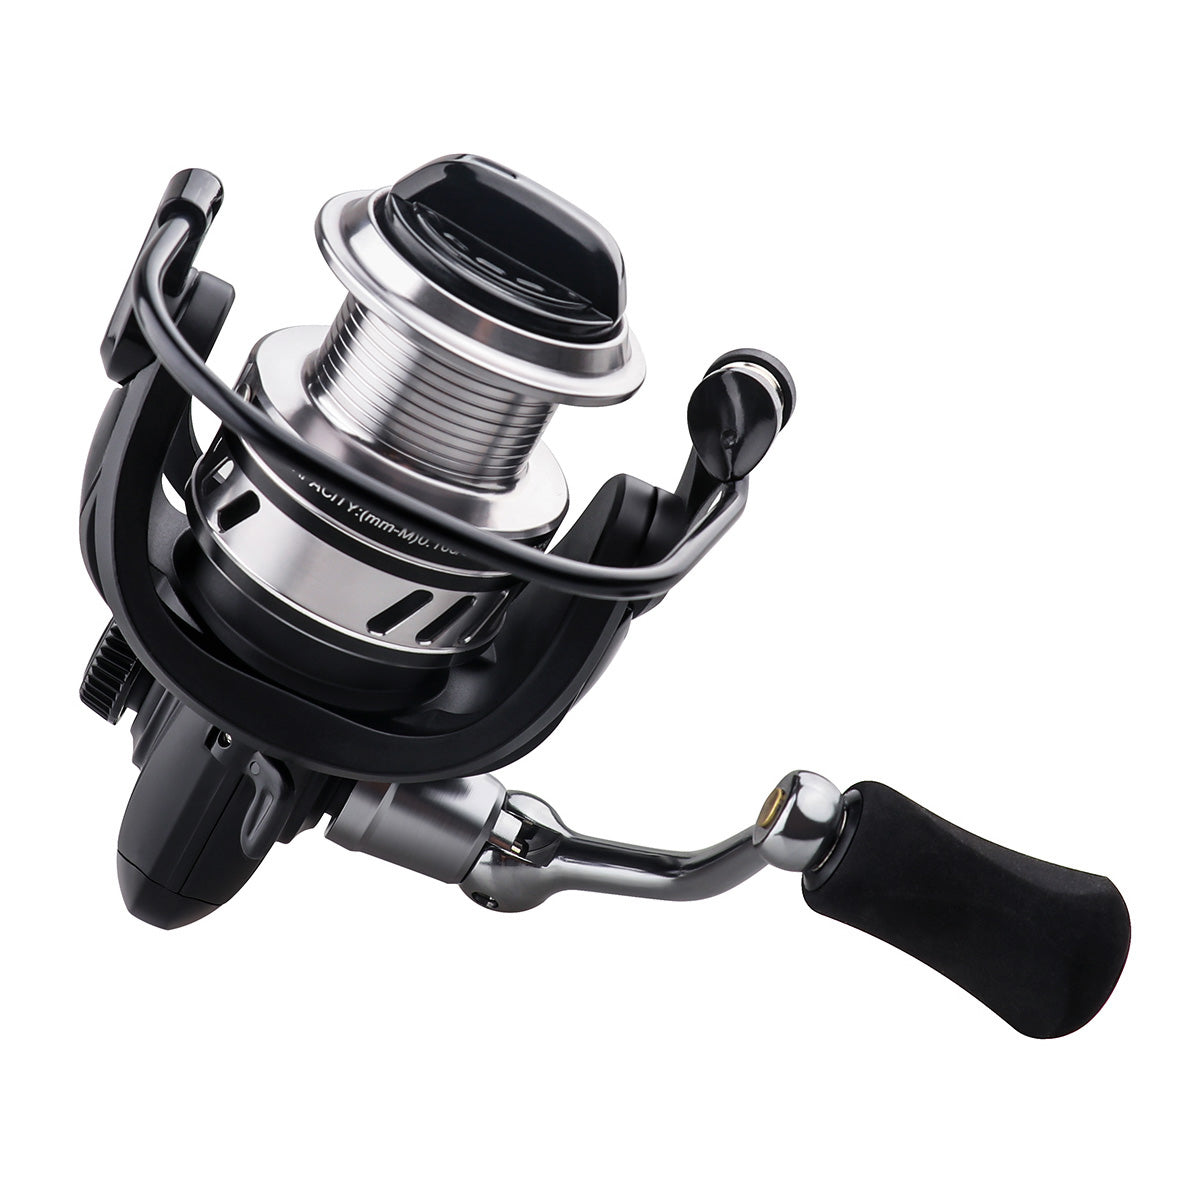 Spinning Fishing Reel 50lb Max Drag Powerful Stainless Steel